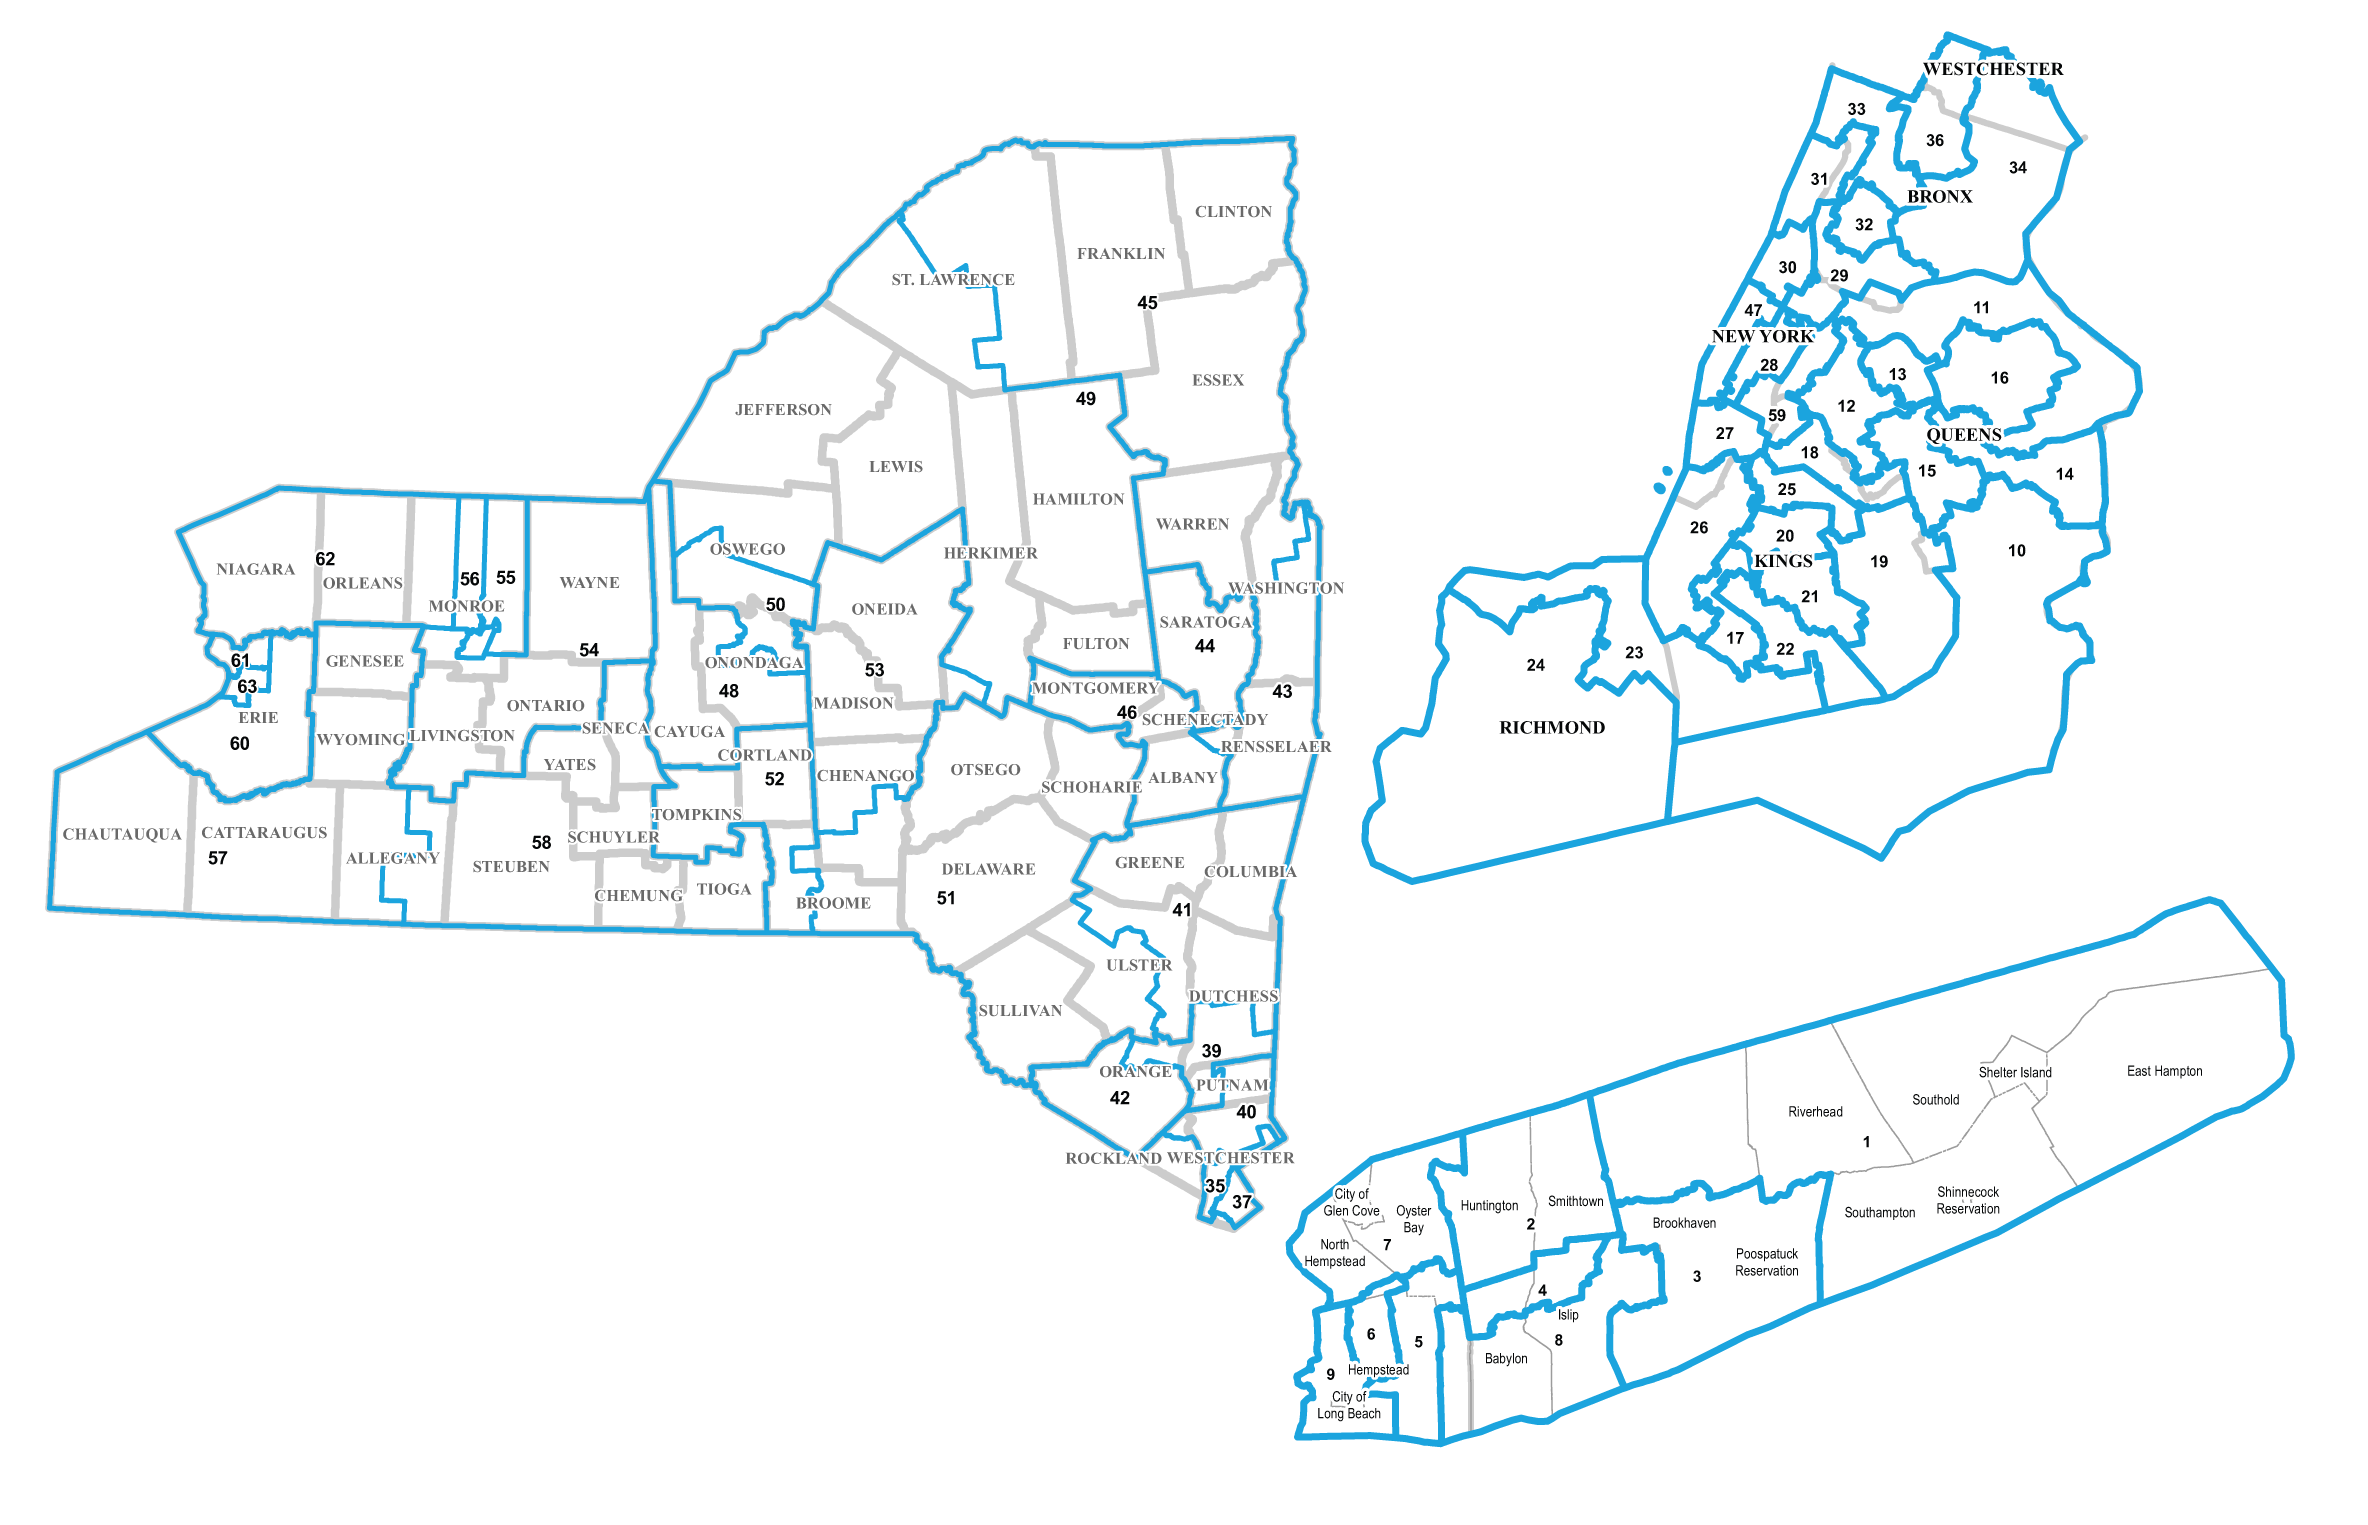 Congressional Districts